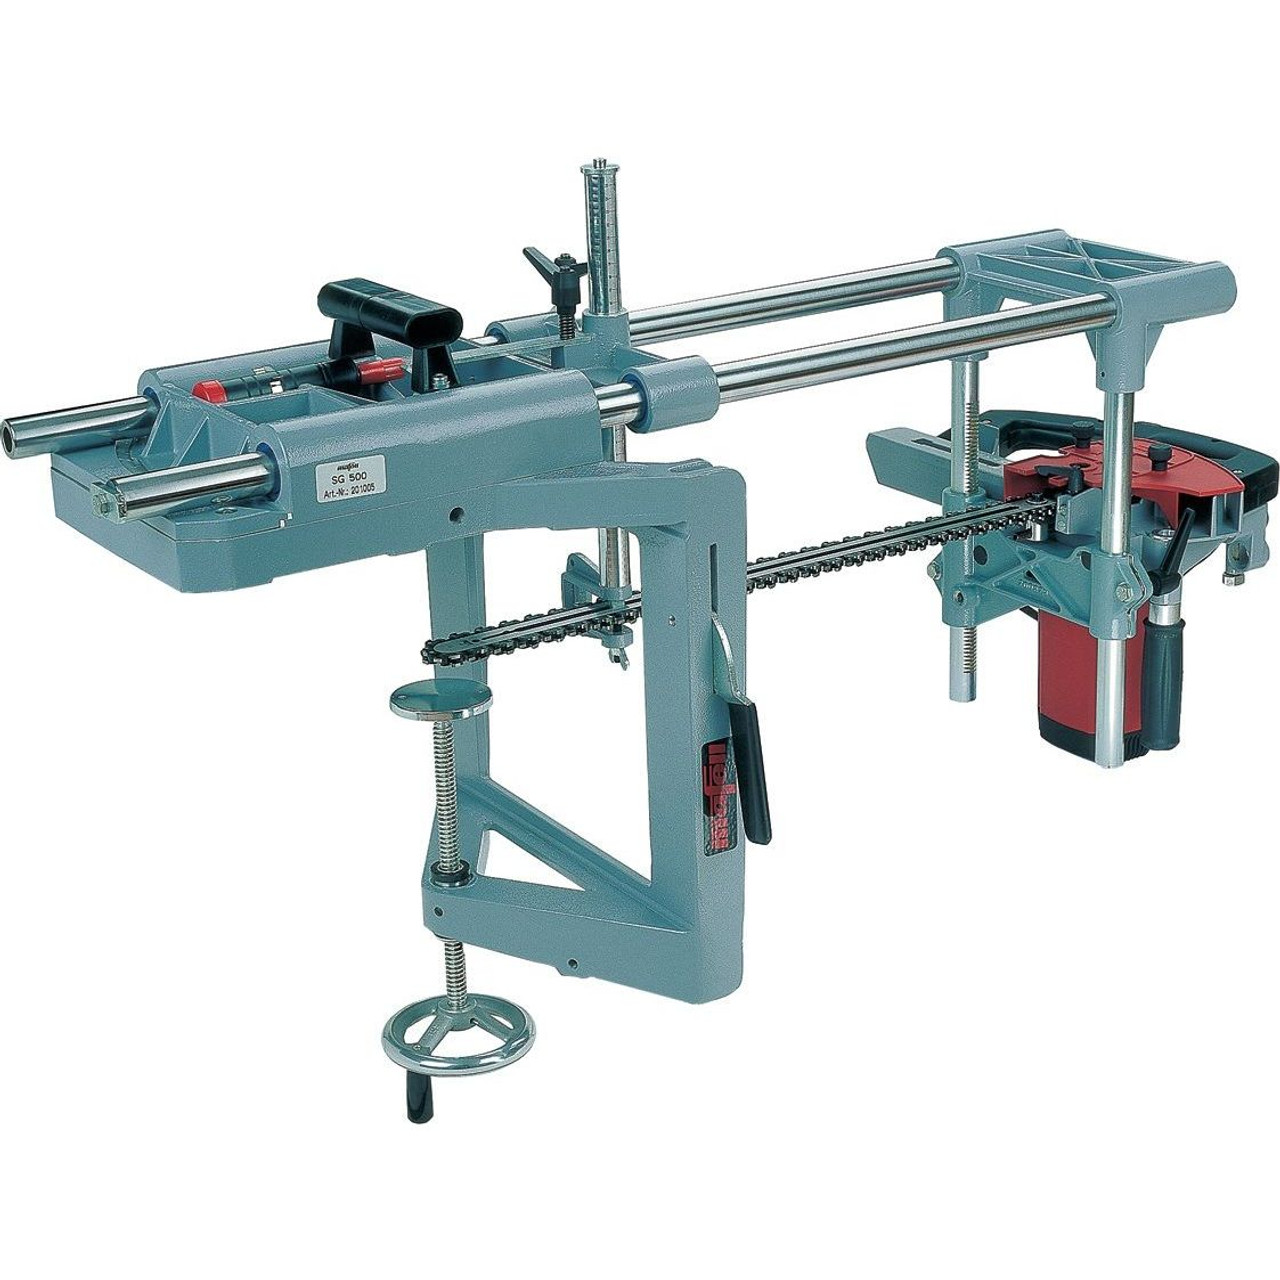 MAFELL Chain Mortiser SG 400 with  for Carpenters that have  available in Australia and New Zealand